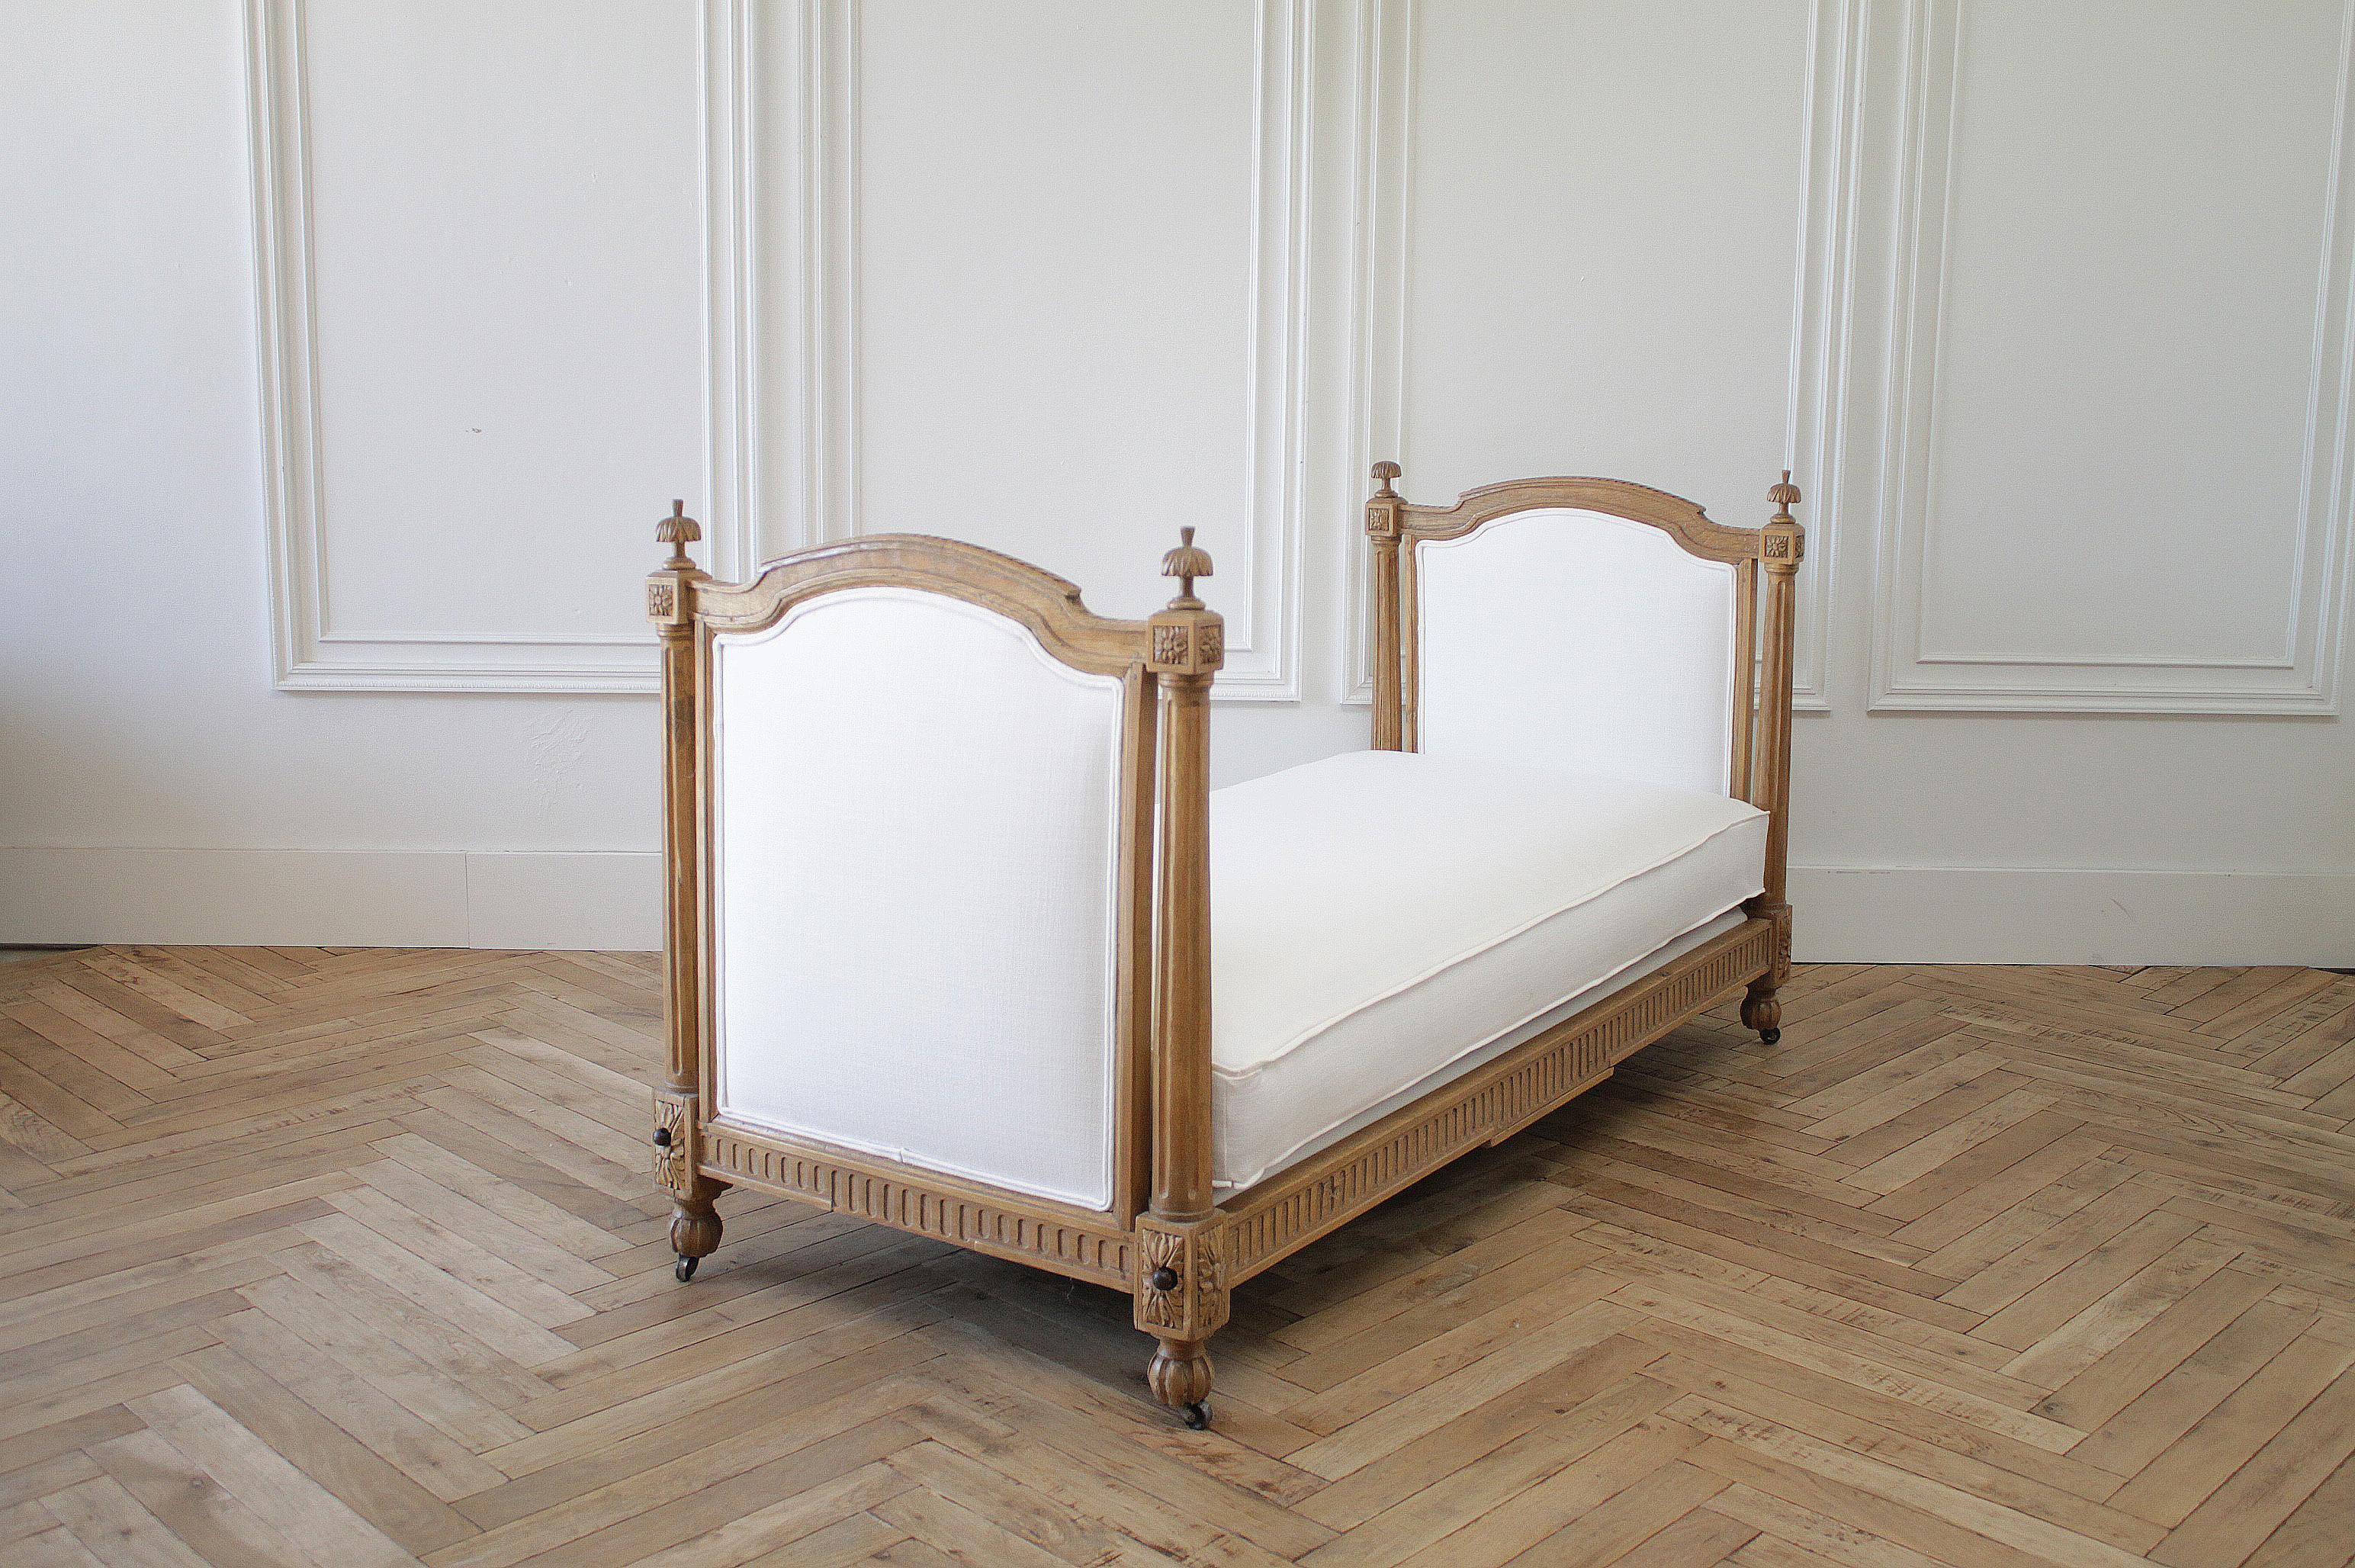 19th century carved natural walnut daybed with white upholstery
Original side rails and bolt construction, this daybed is solid and sturdy. Original caster wheels, with carved finials. We reupholstered this in a durable easy to clean white nubby